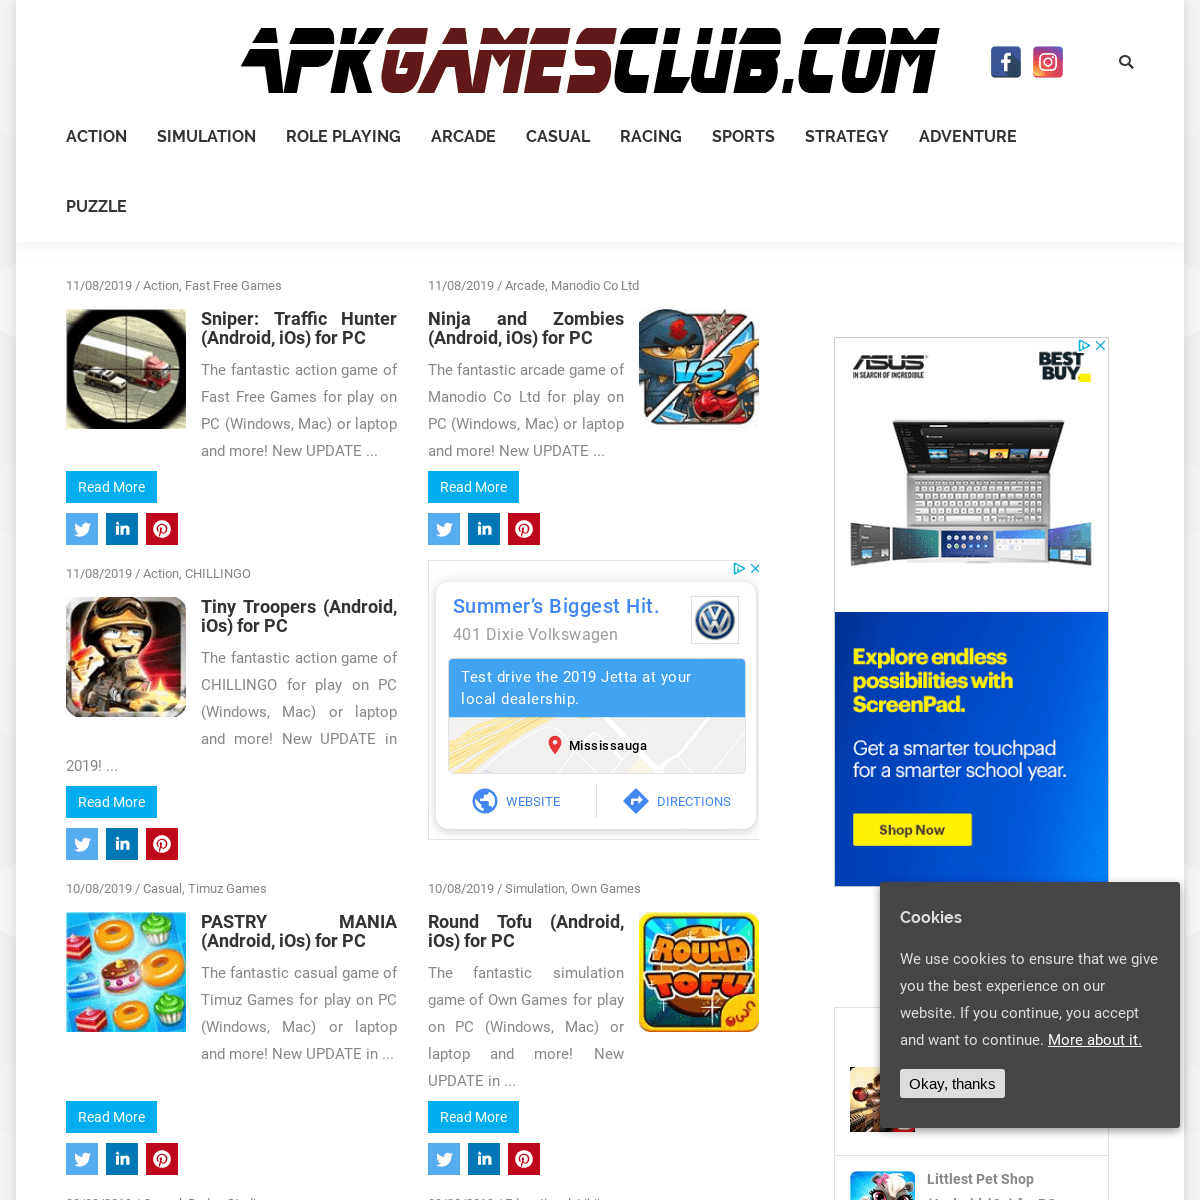 Play / Download on PC? APK Games Club is your site! - Free Download | ApkGamesClub.com